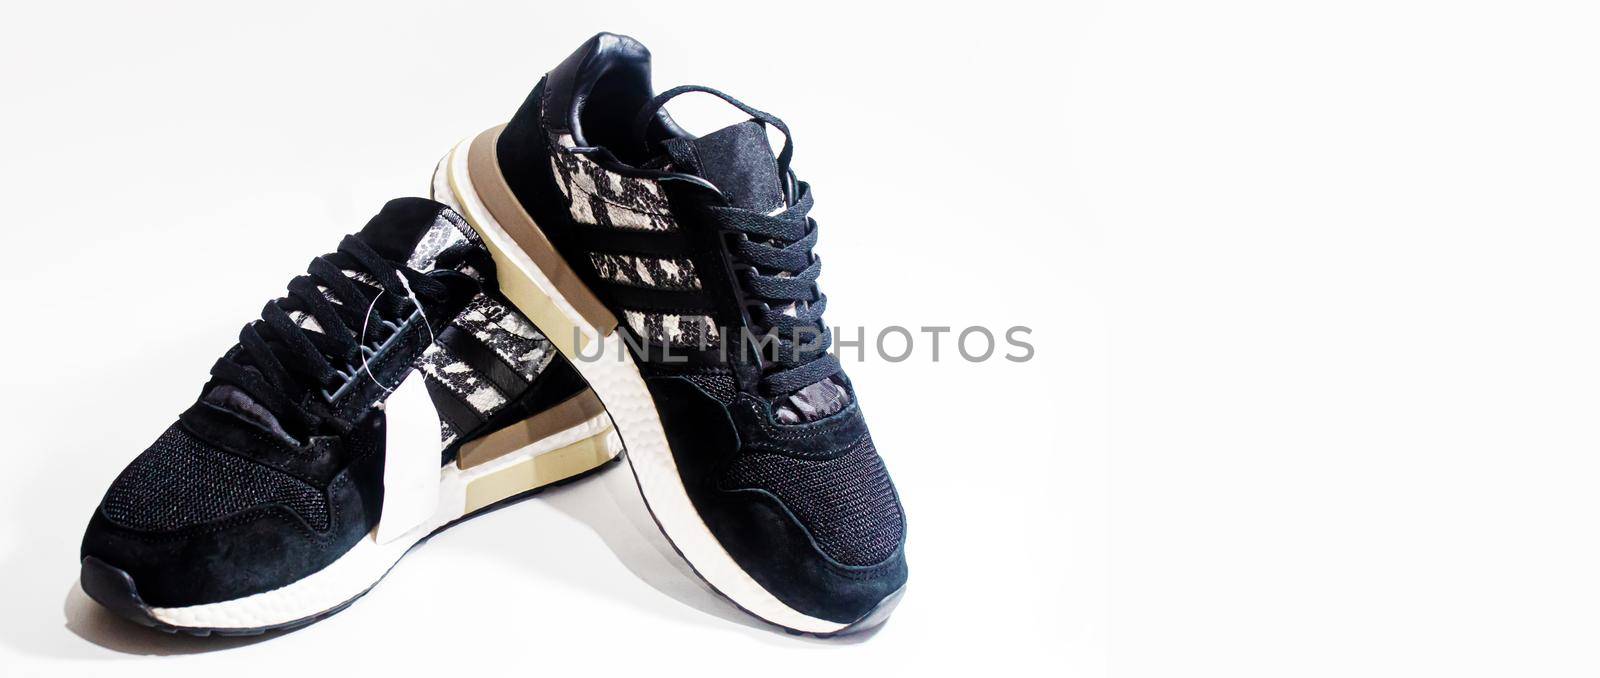 sneakers on white background. selective focus by mila1784